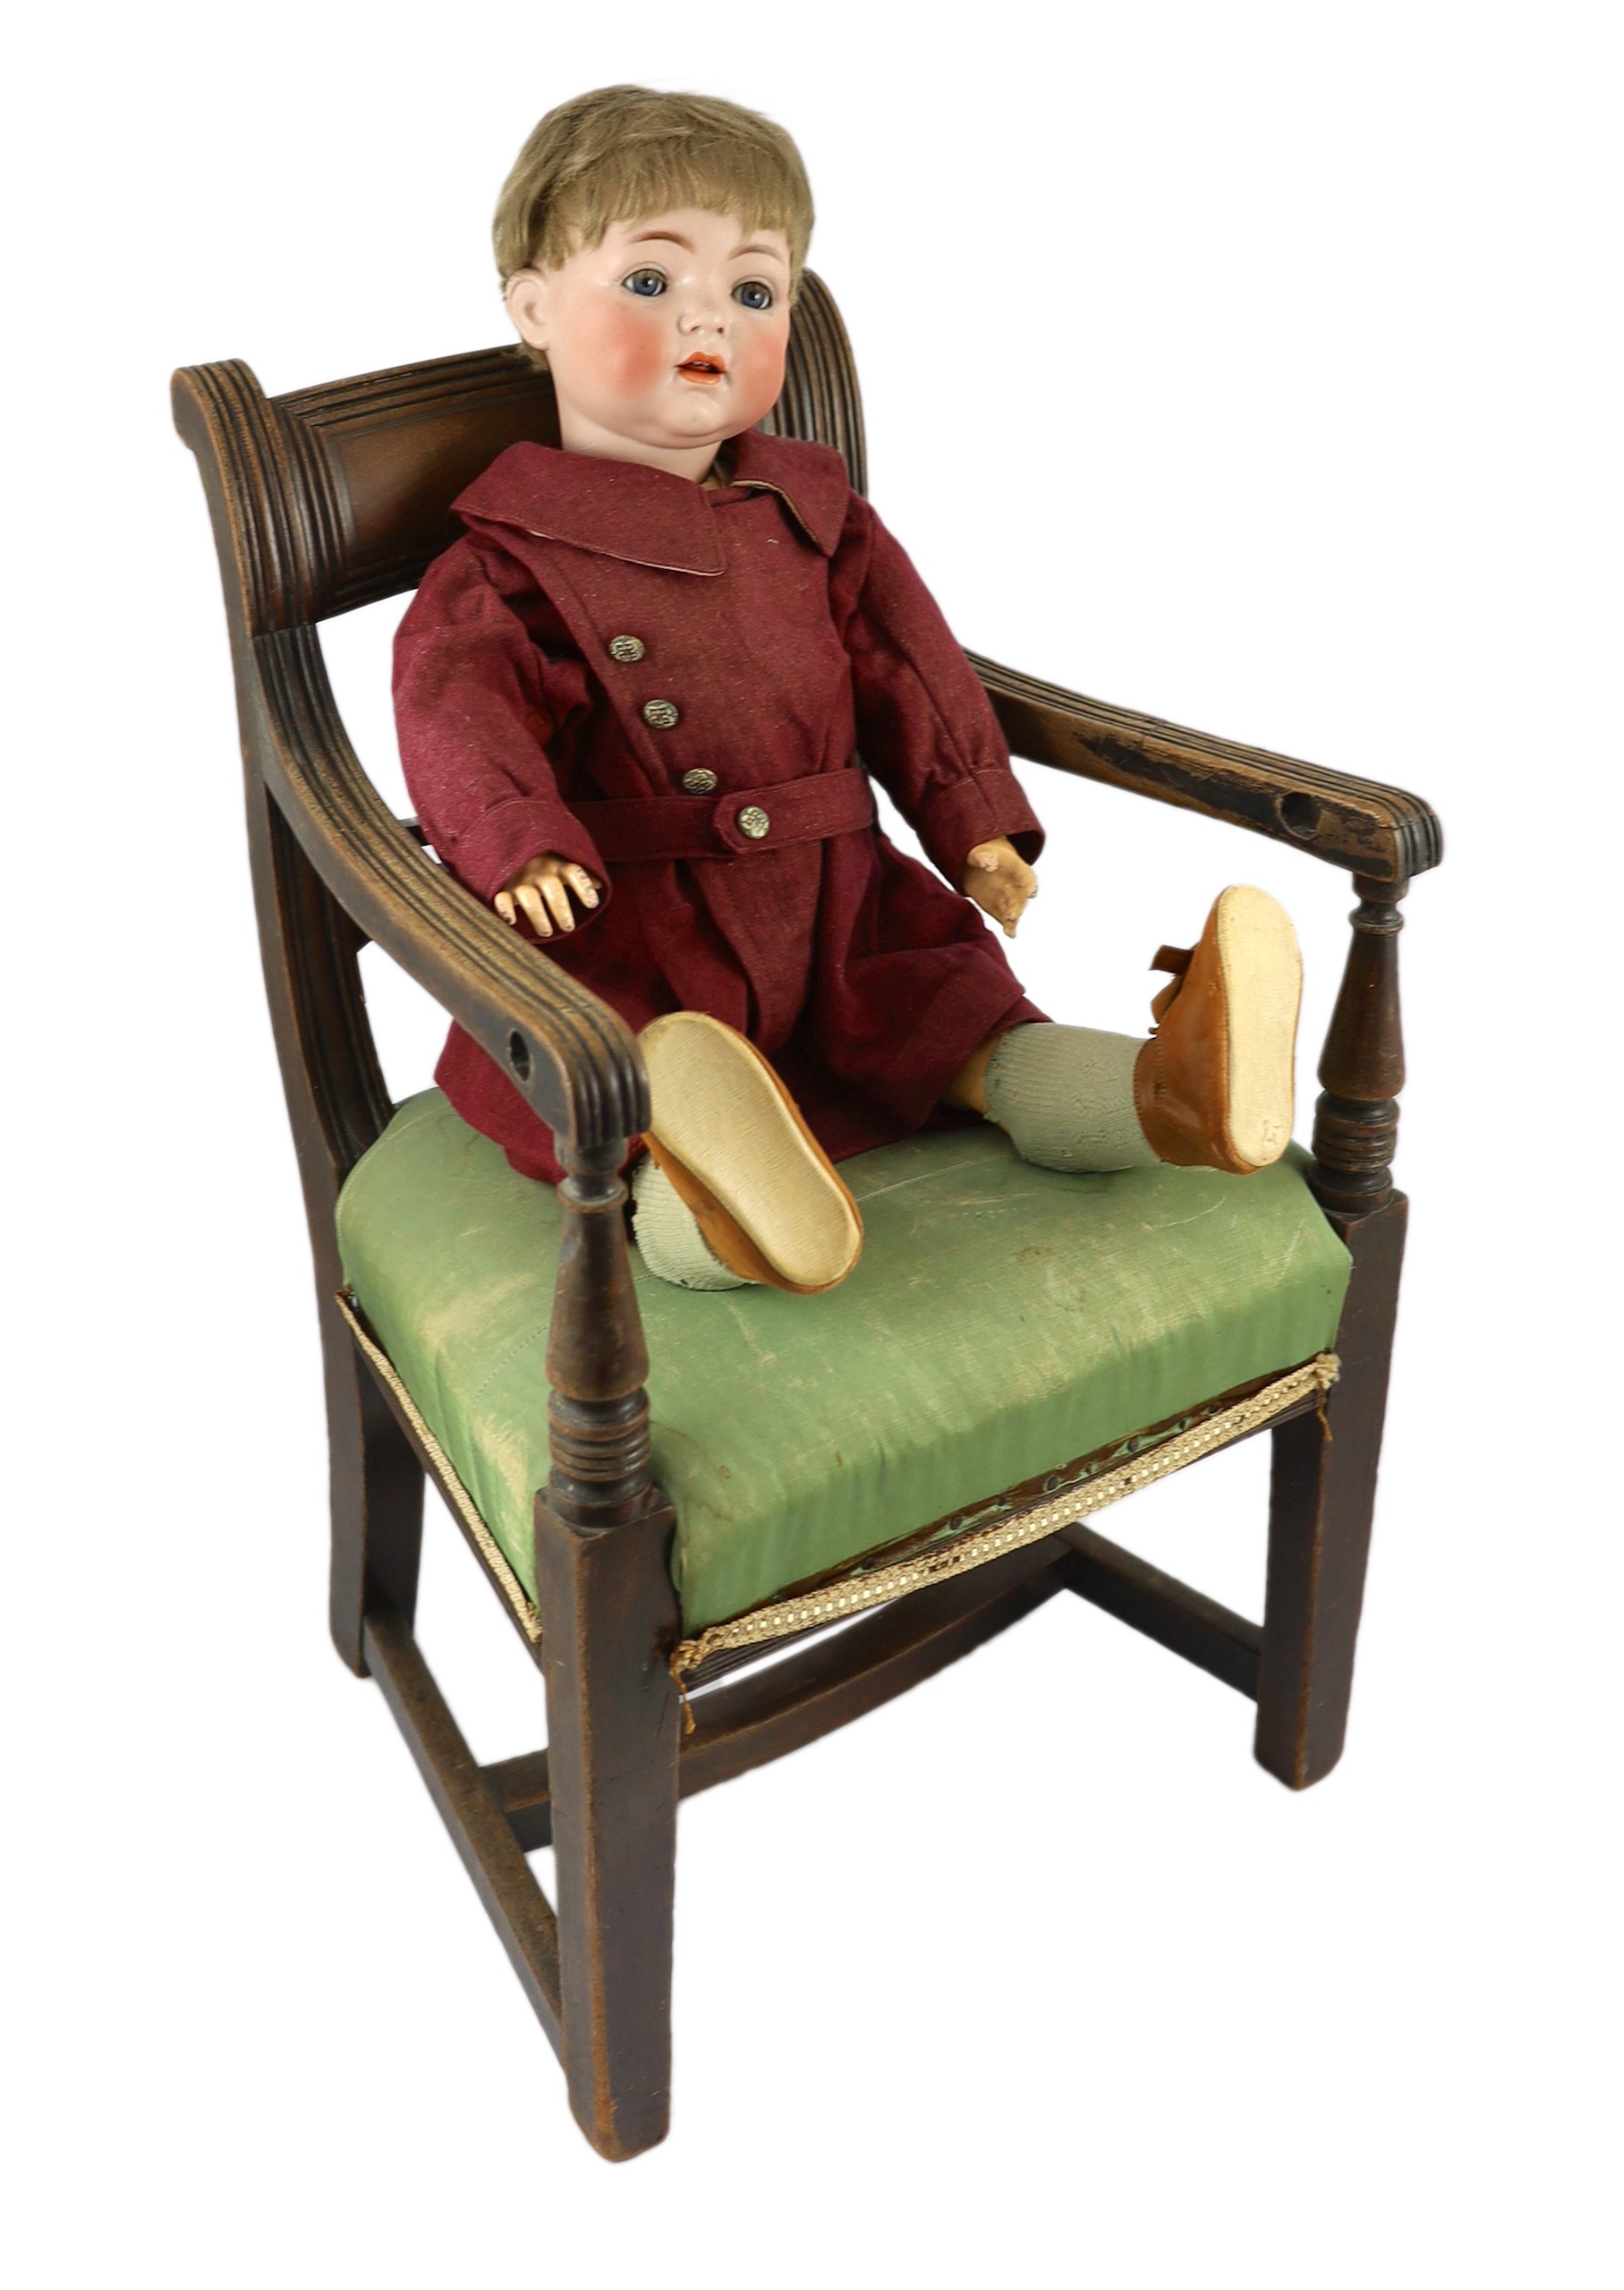 A Kammer & Reinhardt / Simon & Halbig bisque character doll, German, circa 1912, 22in. Please note the chair is for display purposes only.                                                                                  